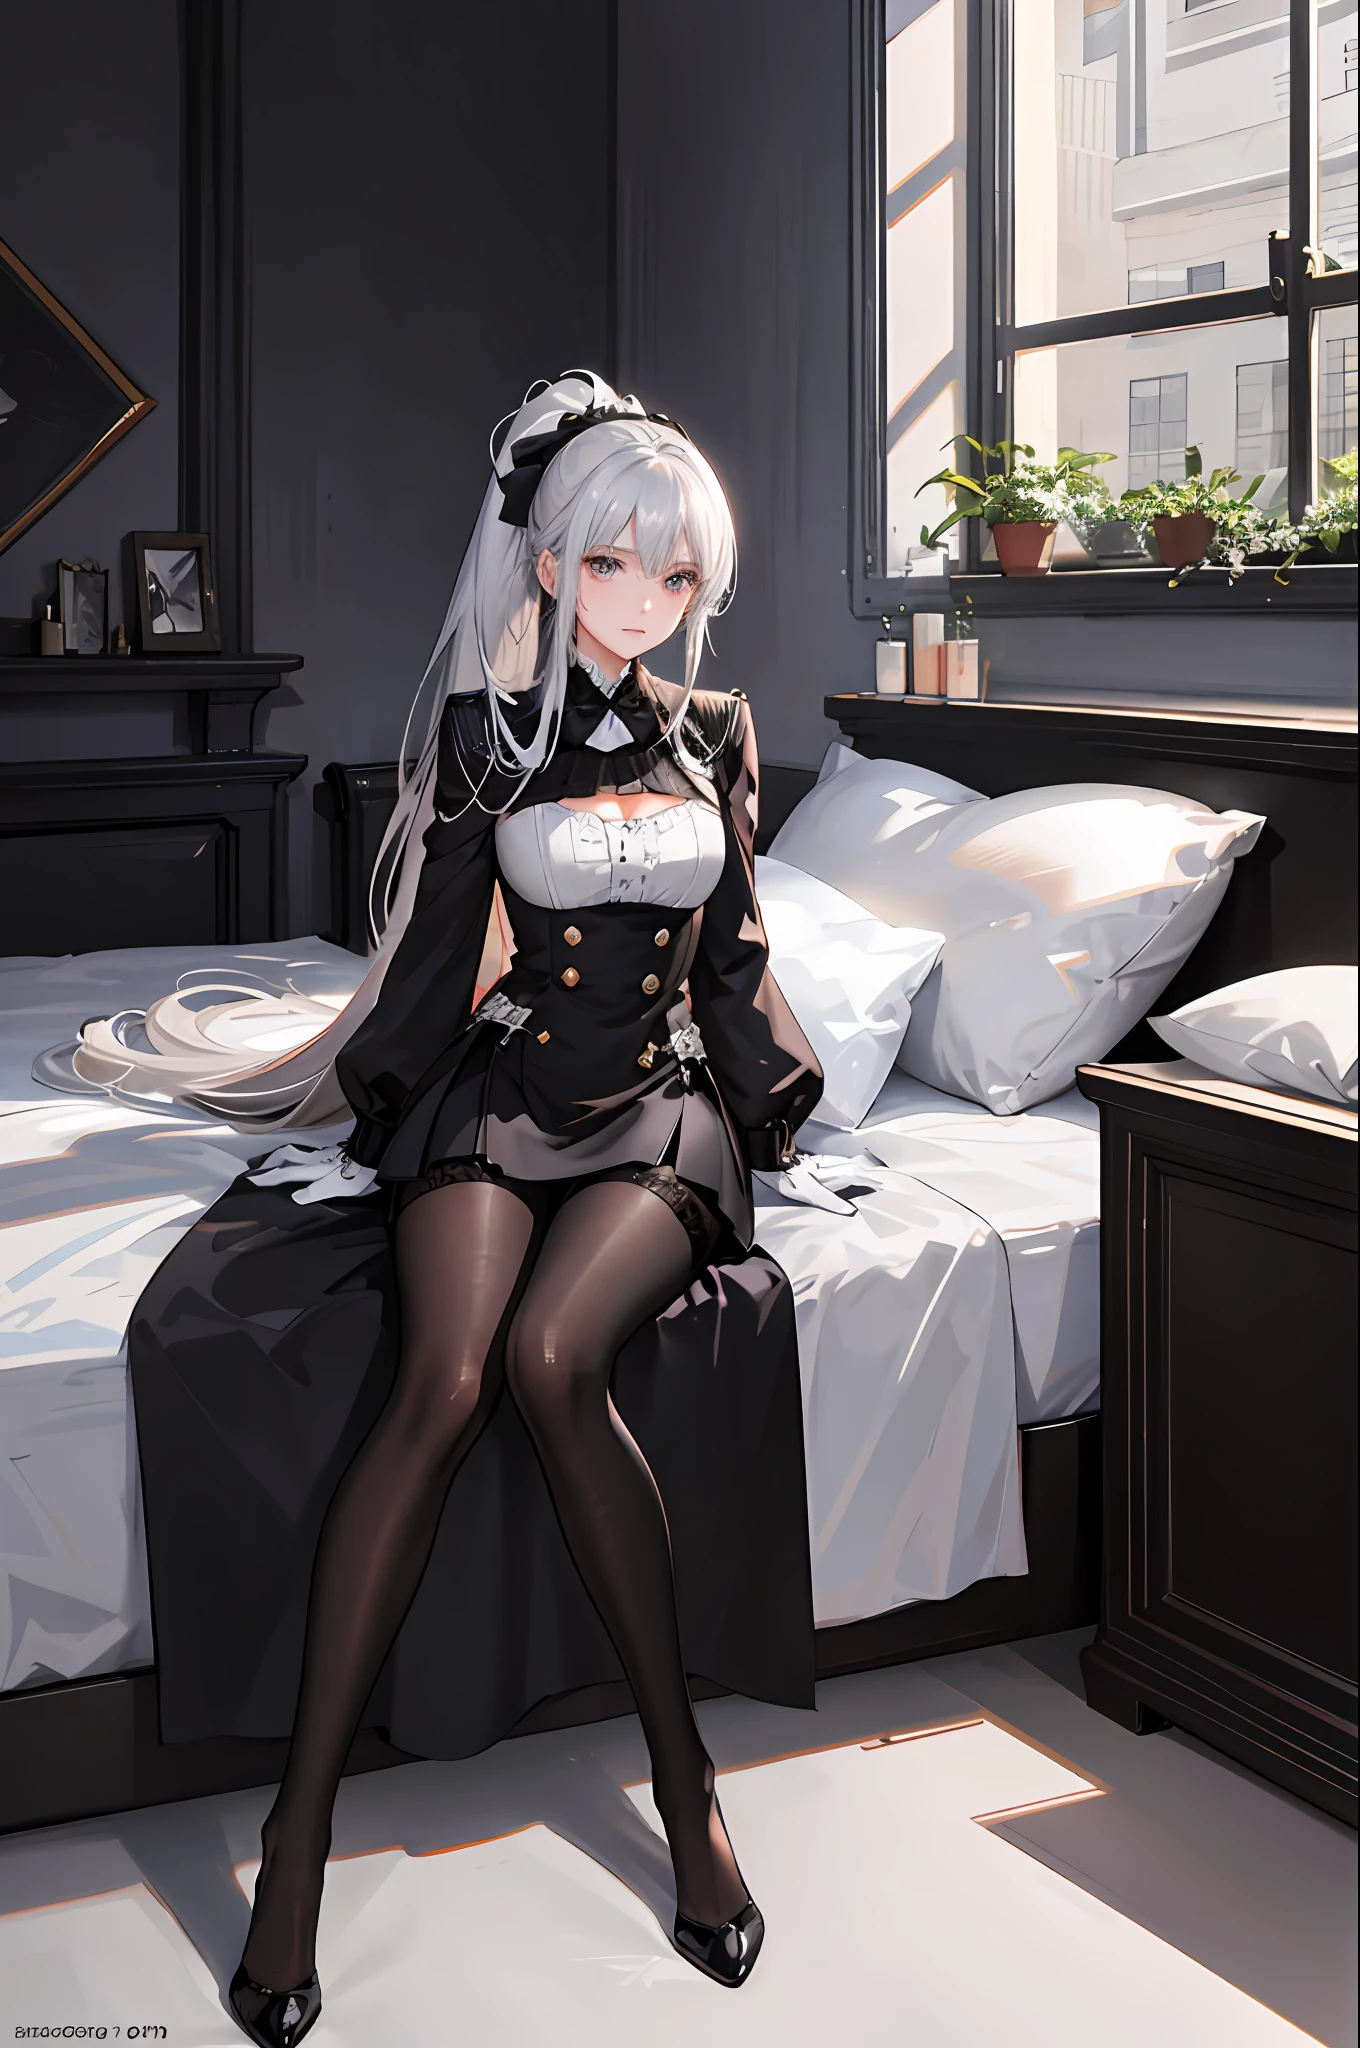 1 girl! , ray tracing, (dim lighting), [detailed background (bedroom), (silver hair), (silver hair) (fluffy silver hair, plump and slim girl) (with high ponytail) alone in the bedroom, blonde eyes (wearing intricately embroidered black high-waisted pants with pantyhose) and white ruffled bow gloves), showing a delicate slim figure and graceful curves, correct limbs! Sitting on the bed, the facial features are delicate! Pay attention to the details of the position of the legs! High quality